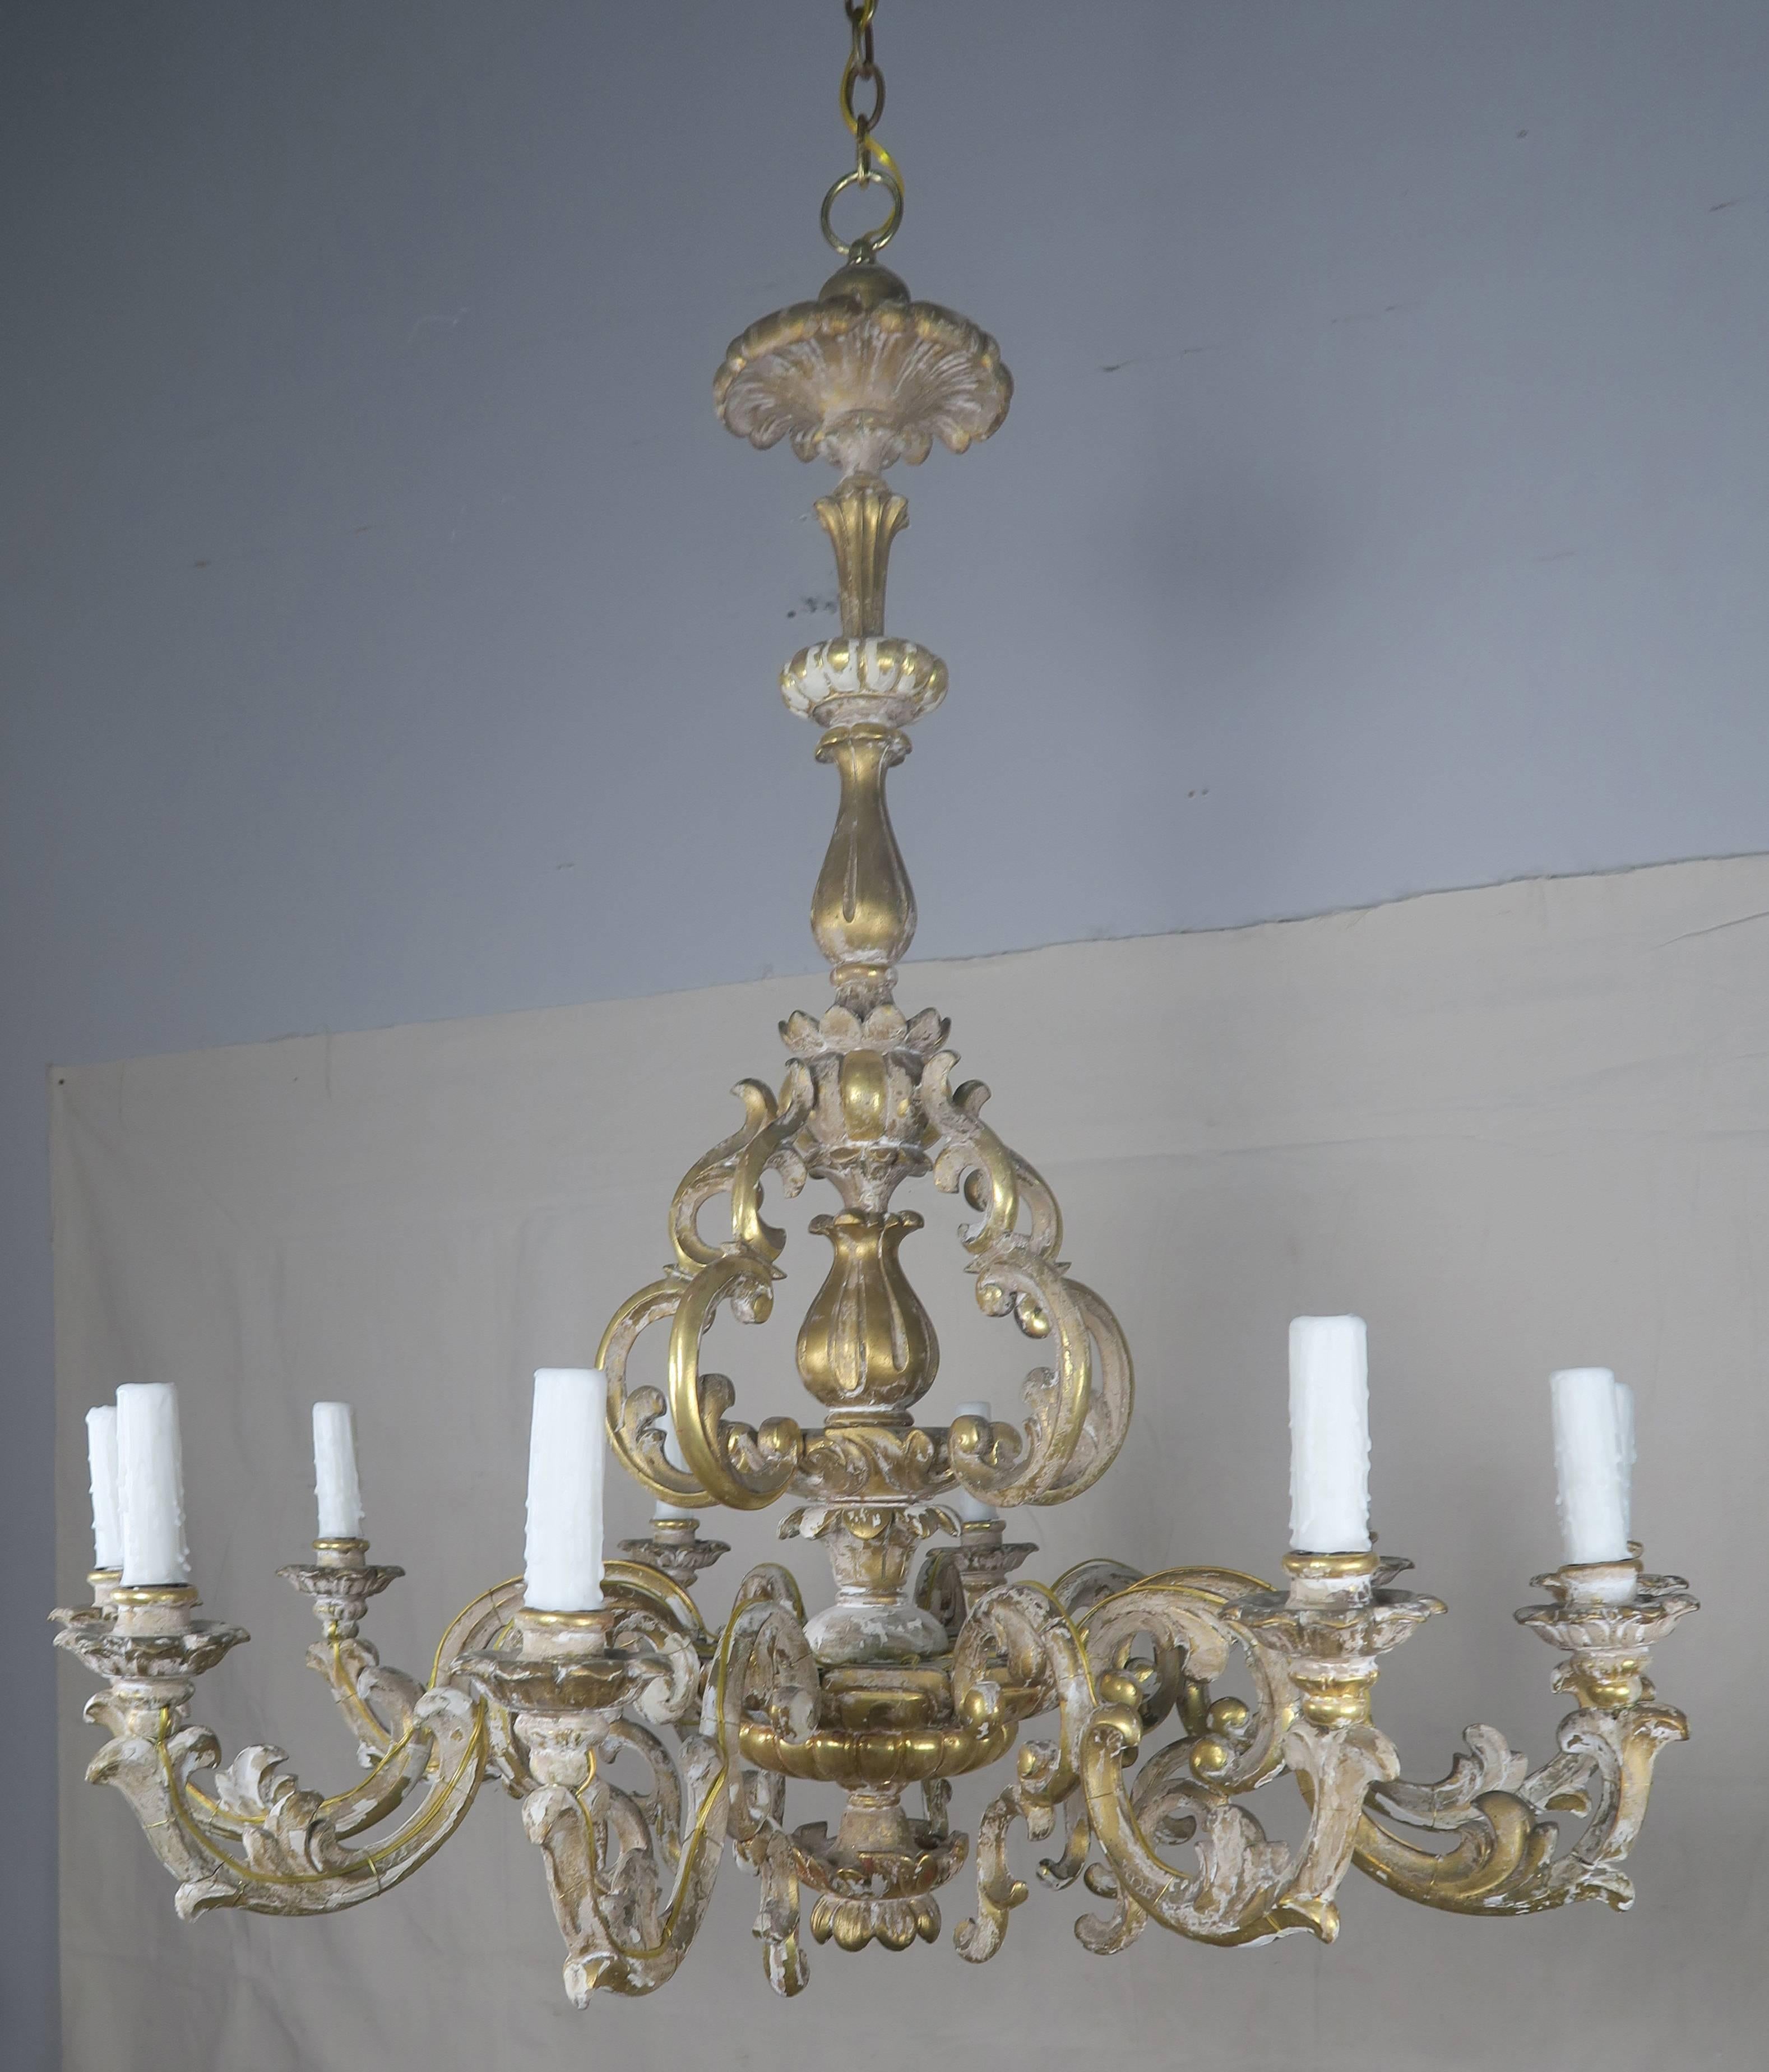 19th century Italian ten-light Rococo style giltwood chandelier that is comprised of scrolled acanthus leaves. The fixture has been wired for electricity (originally for candles only) with cream colored drip wax candle covers. Chain and canopy